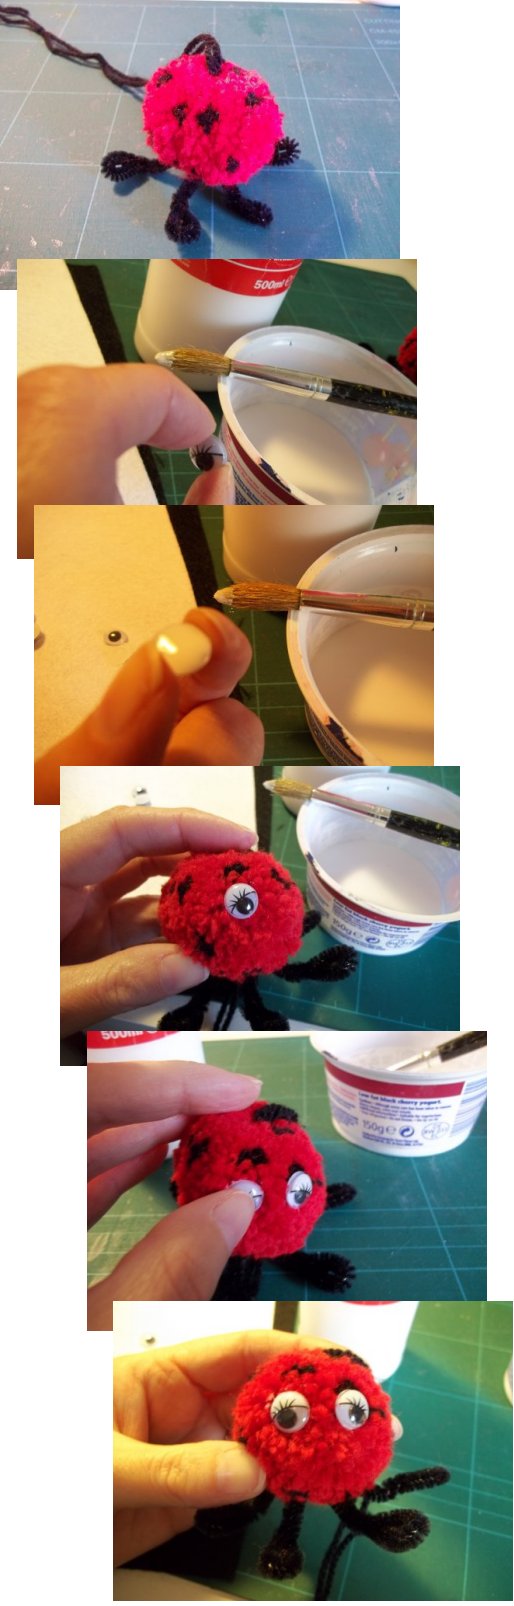 Things to make and do - making pom-pom animals